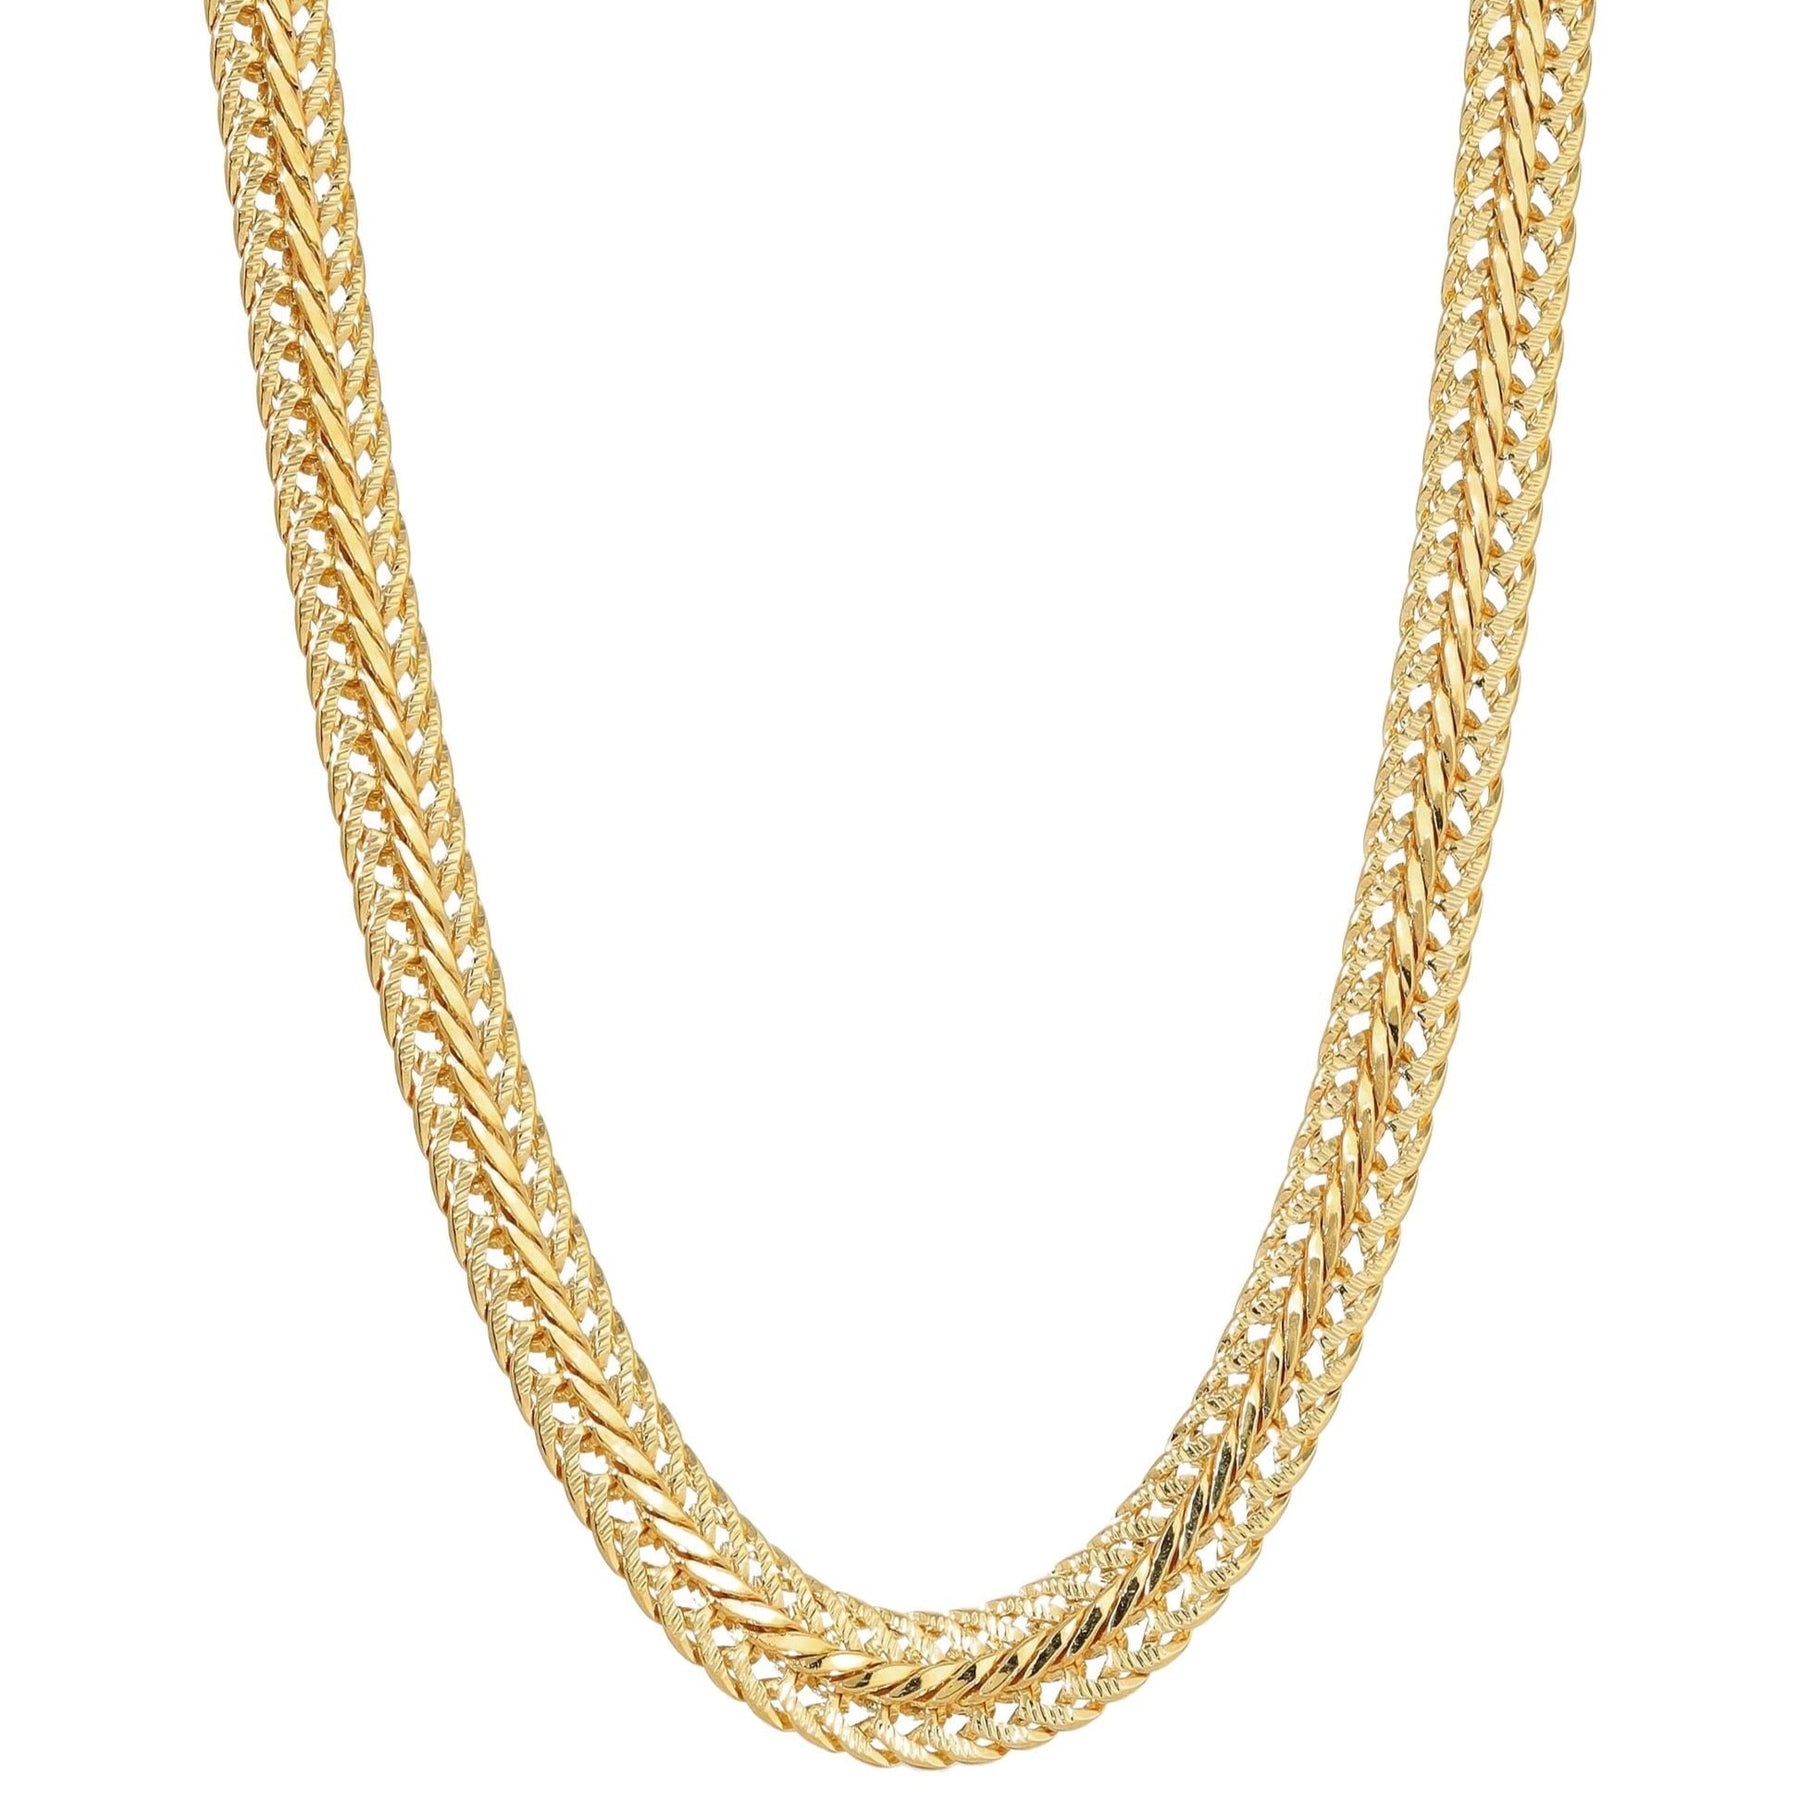 Sharon Flat Woven Necklace